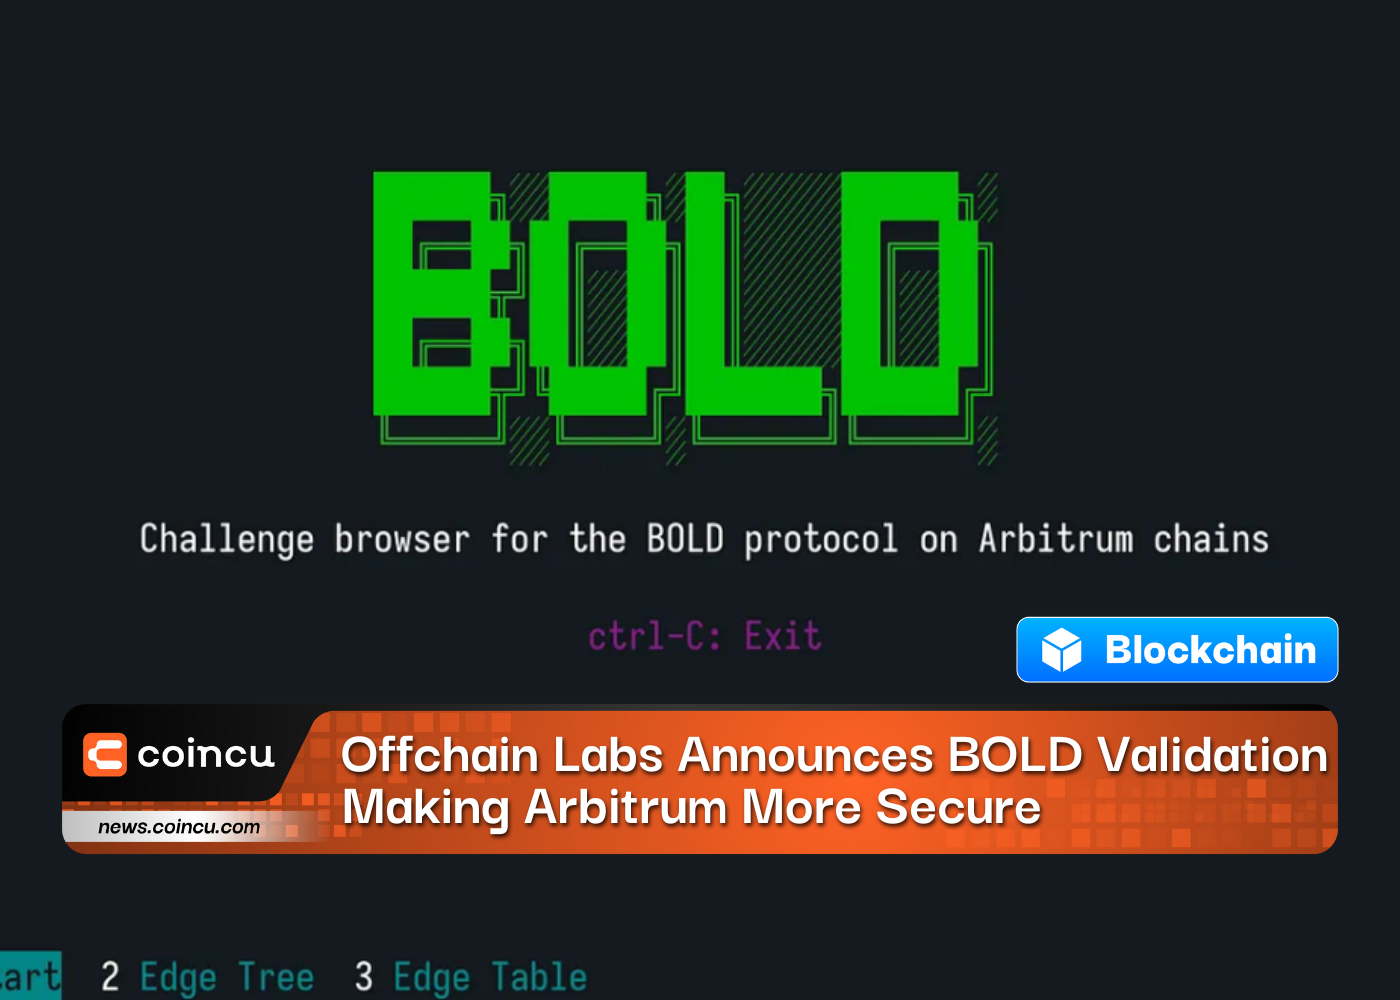 Offchain Labs Announces BOLD Validation Making Arbitrum More Secure